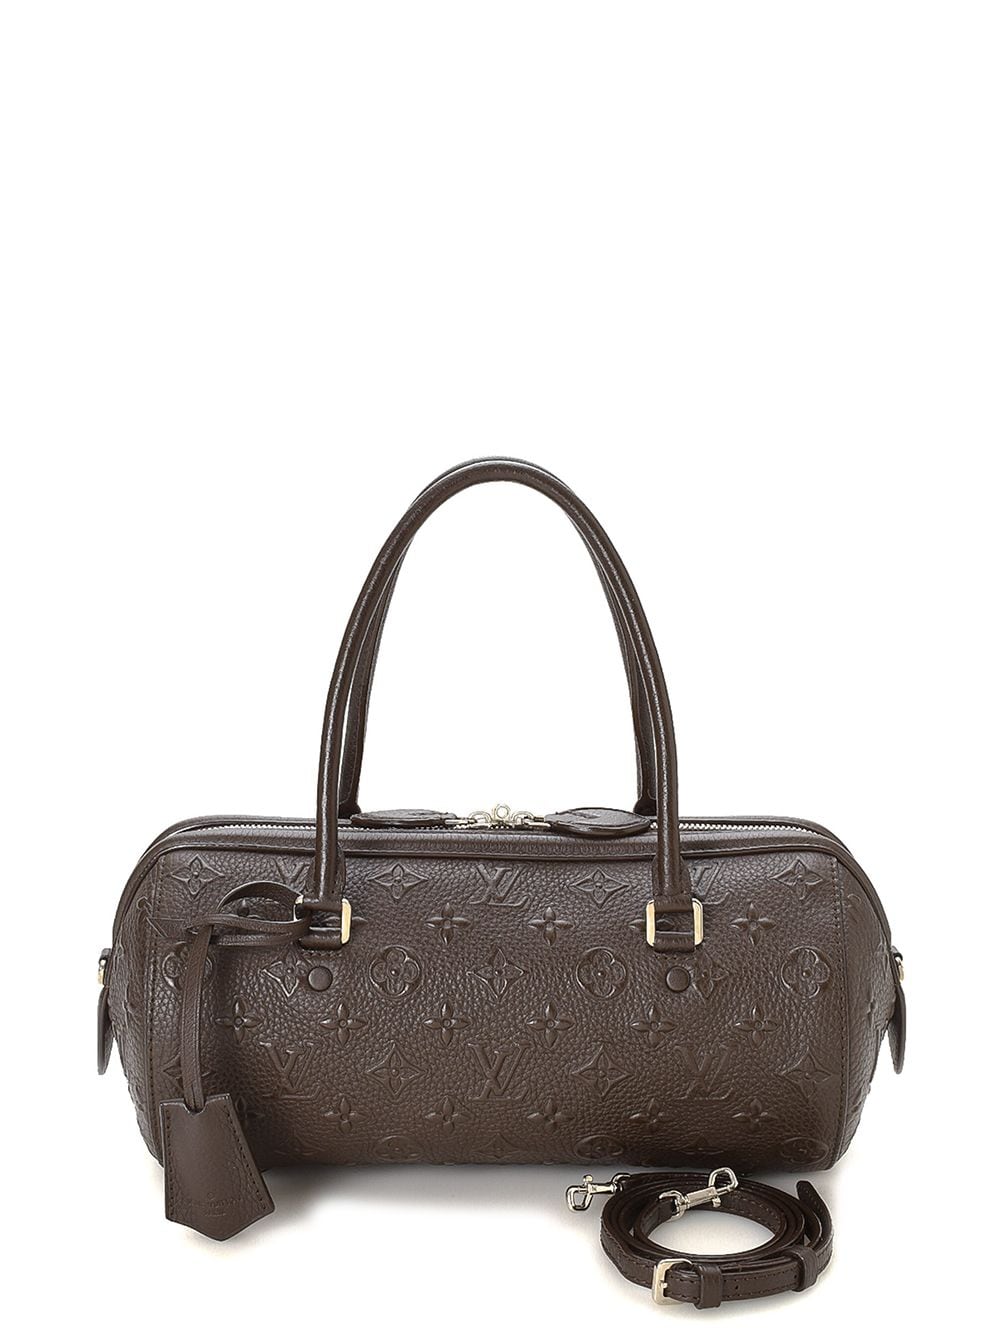 Pre-Owned Louis Vuitton Limited Edition Neo Monogram Revelation